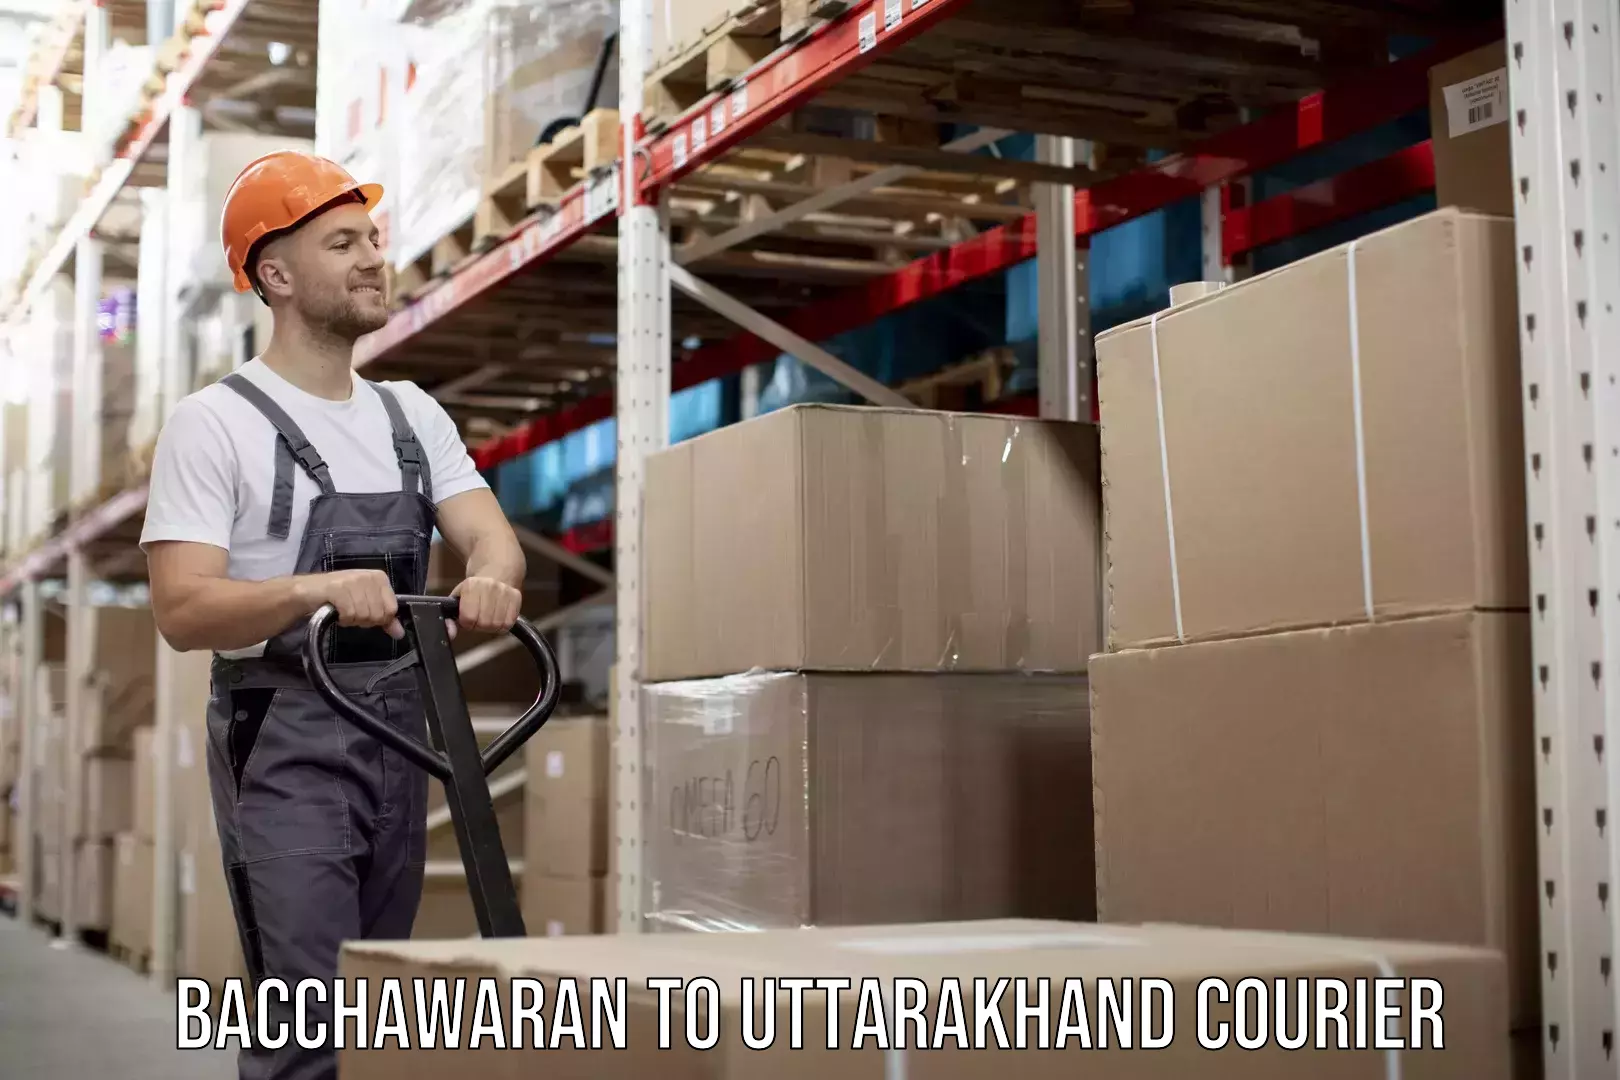 Package delivery network Bacchawaran to Uttarakhand